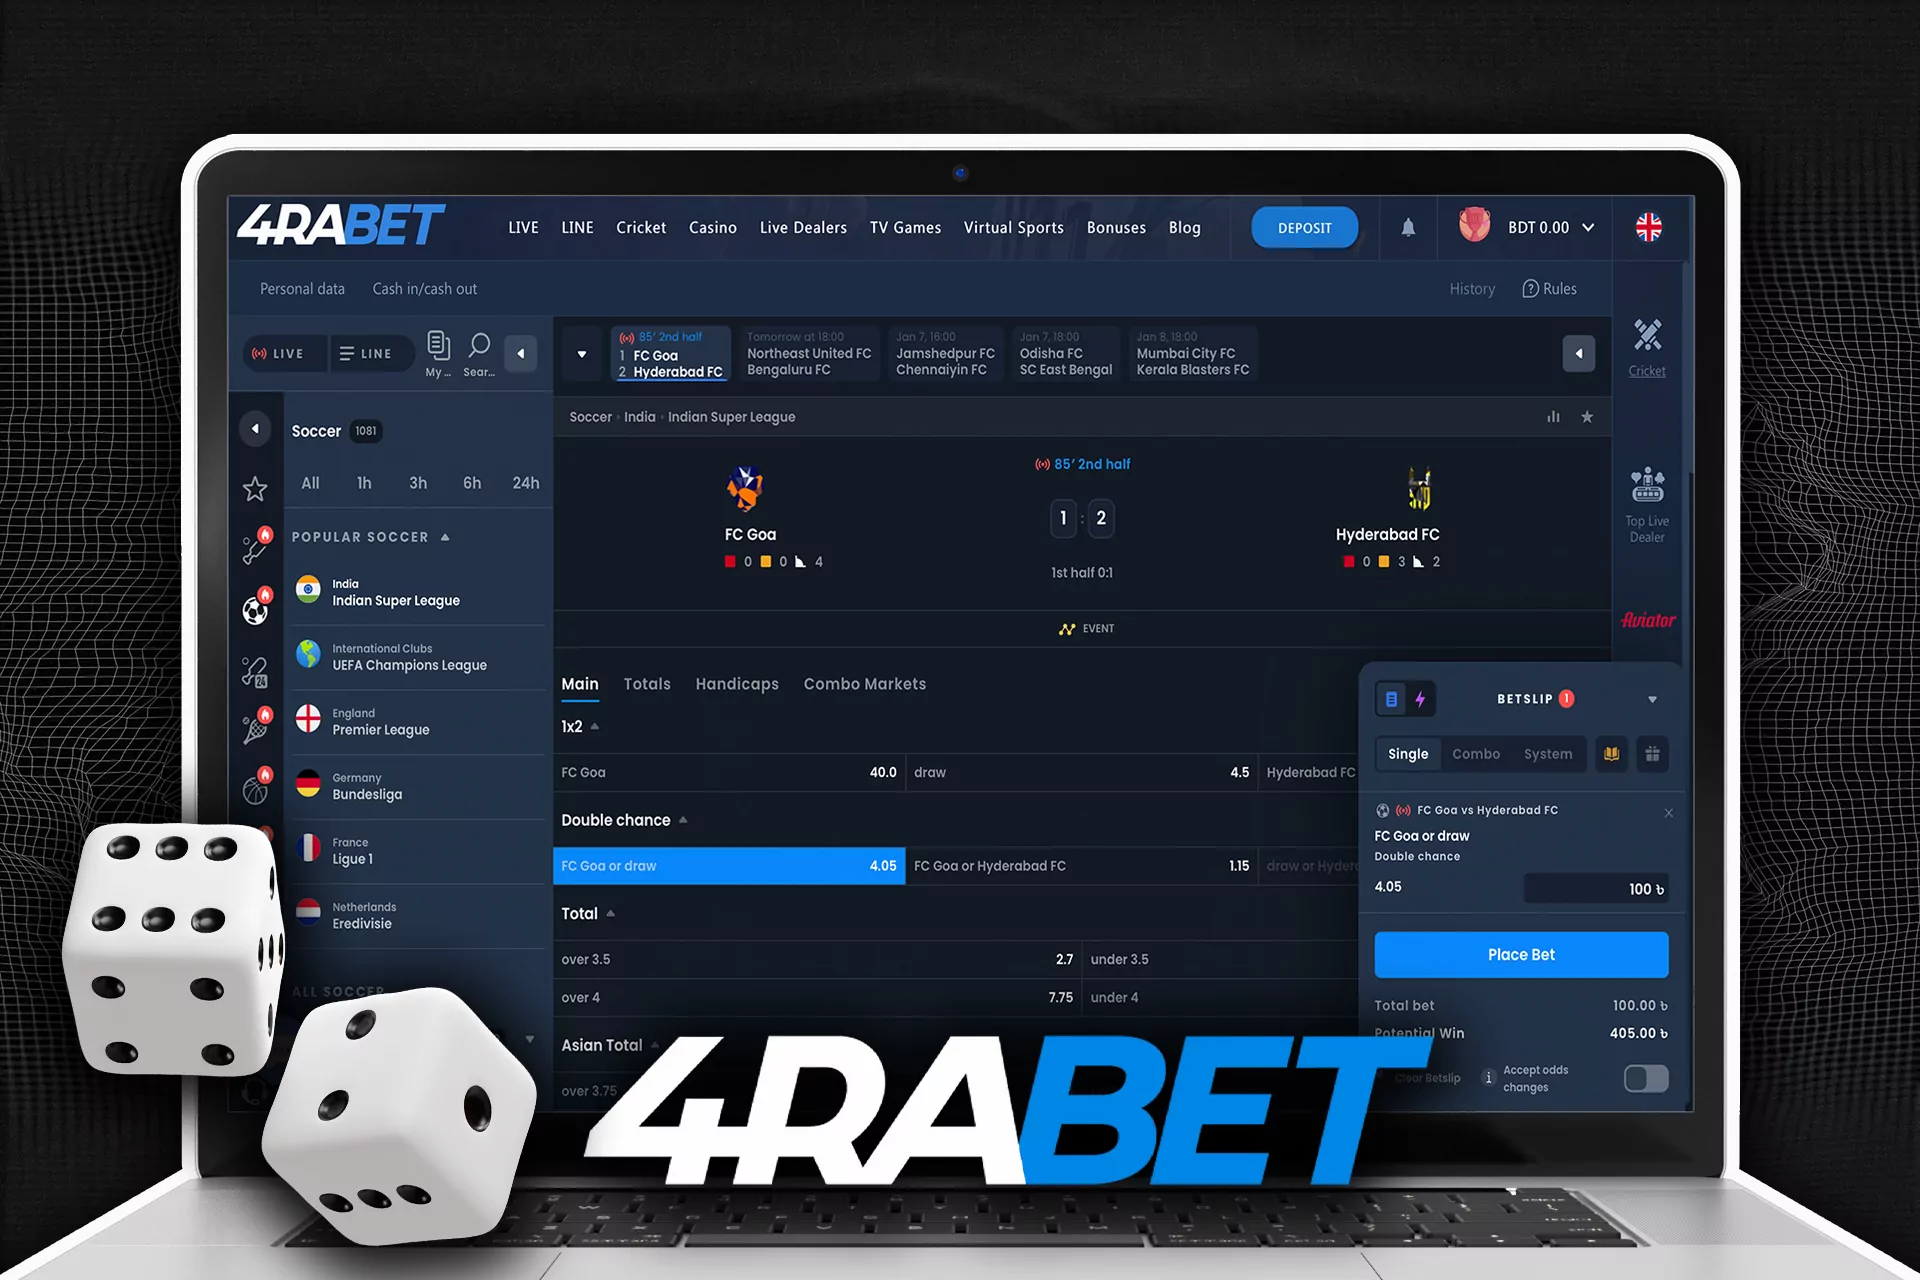 Register at the 4rabet website, choose a match and place a bet.